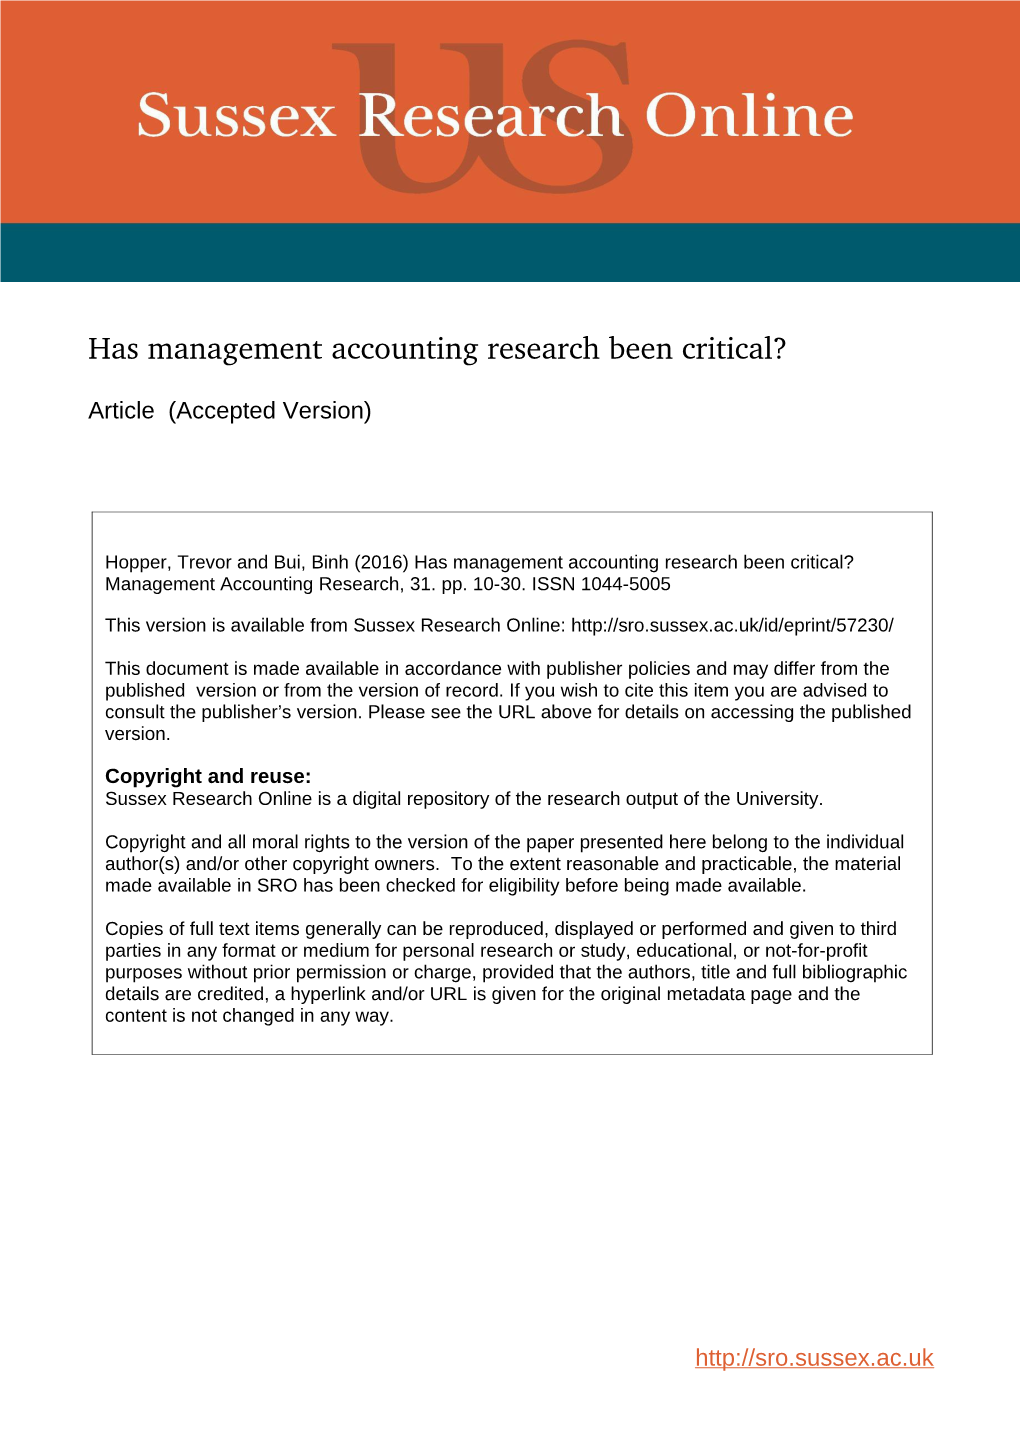 Has Management Accounting Research Been Critical?